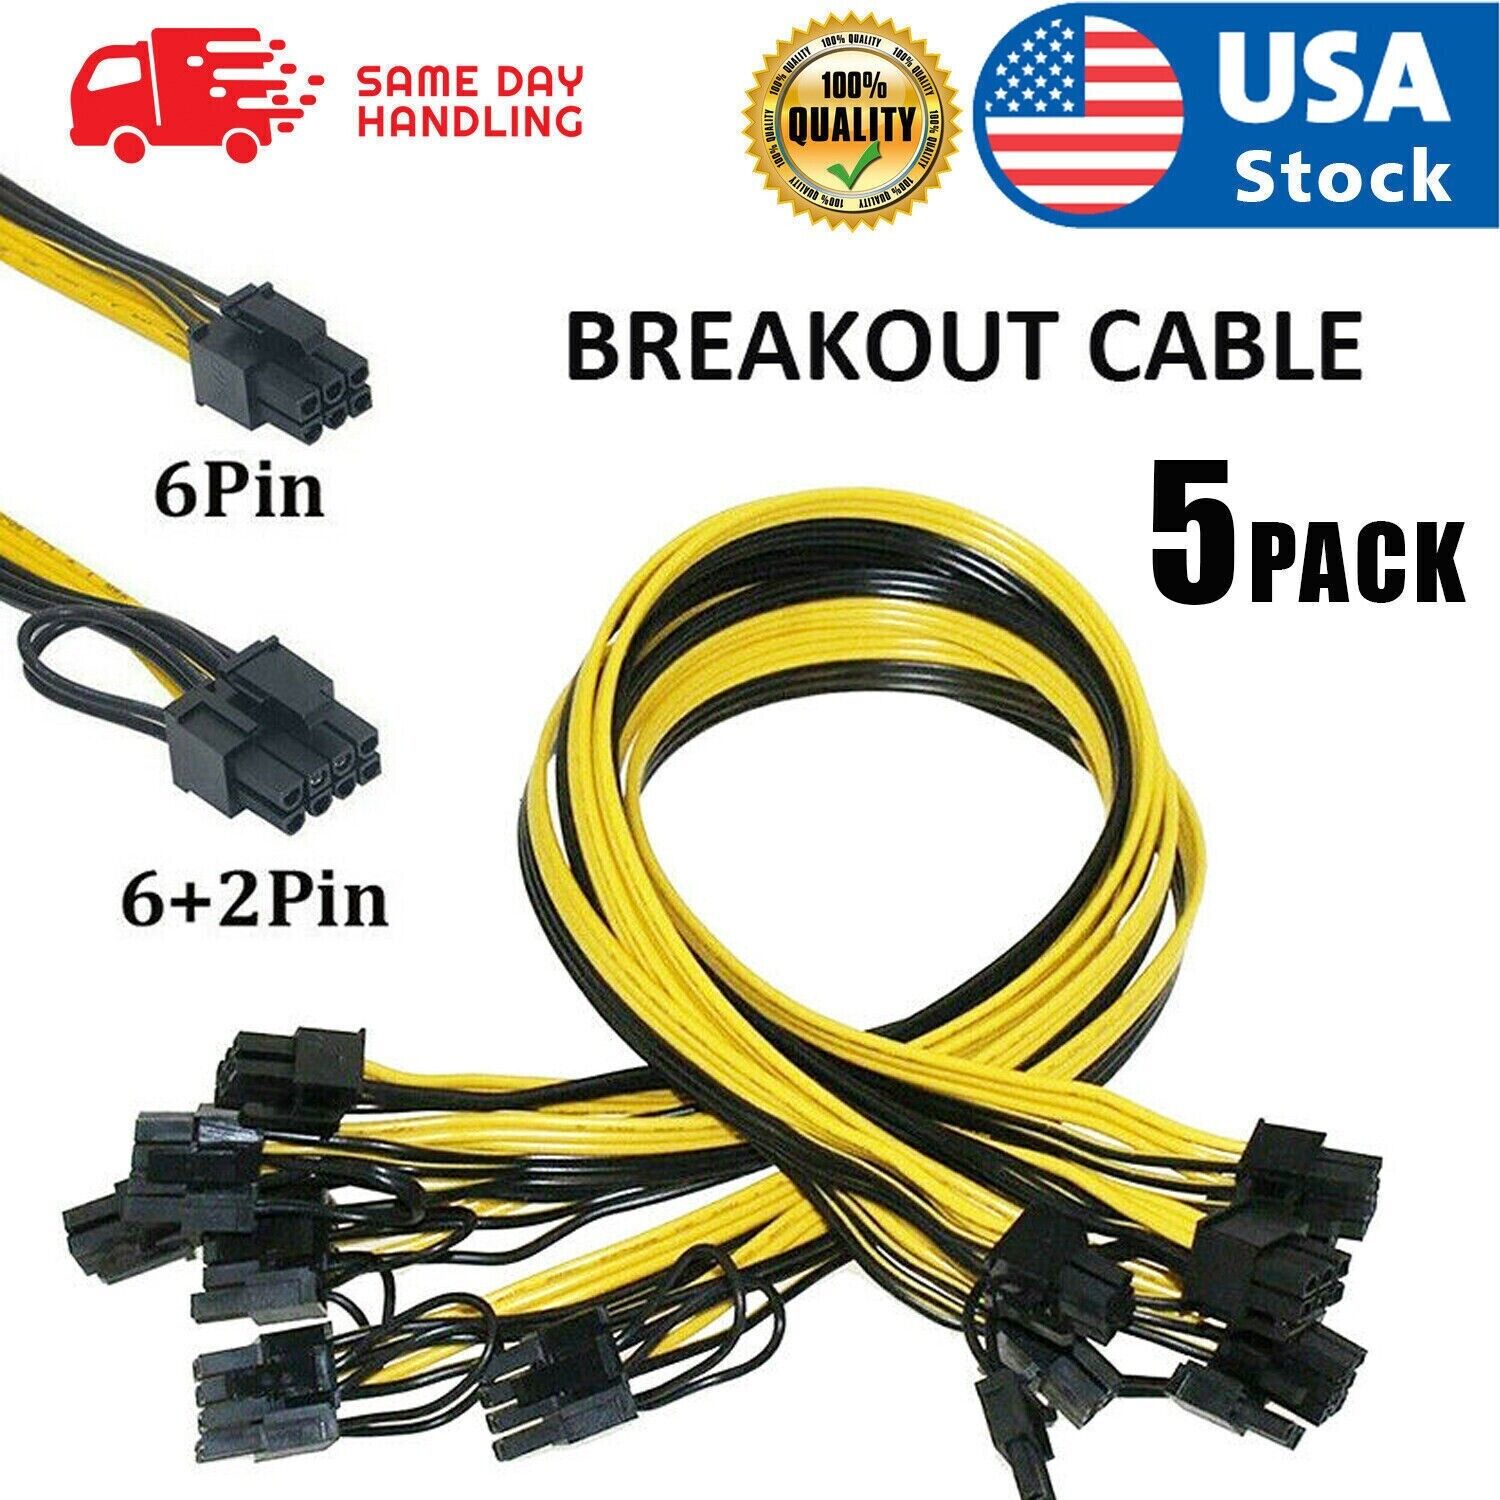 5PCS 50cm Breakout Cable 6 pin to 8 pin (6+2) PCIE Cable 18AWG Mining Cable US